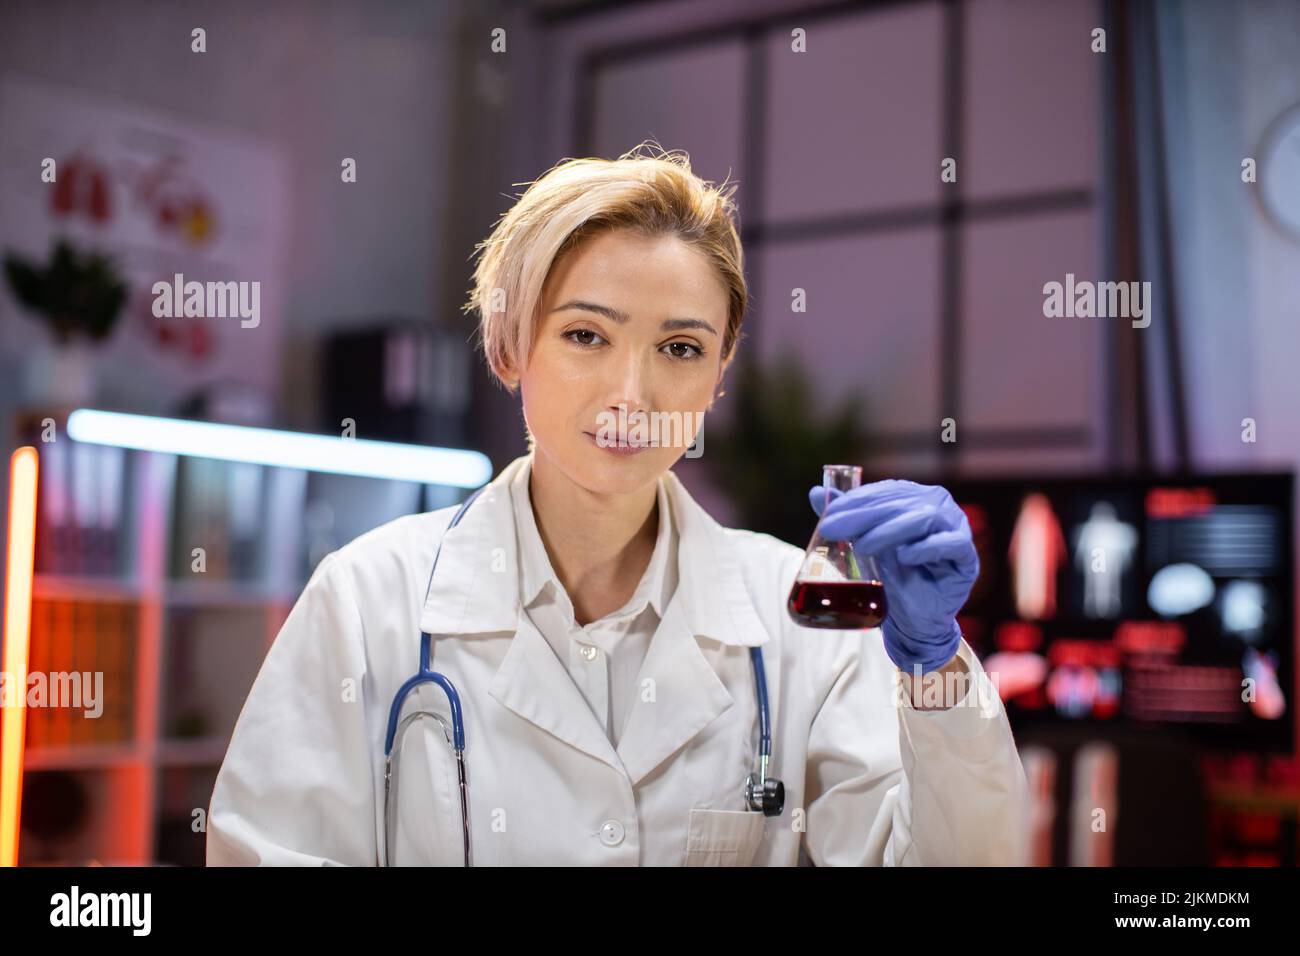 Female scientist working in modern lab. Doctor making microbiology research. Laboratory tools: microscope, test tubes, equipment. Coronavirus covid-19, bacteriology, virology, dna and health care. Stock Photo